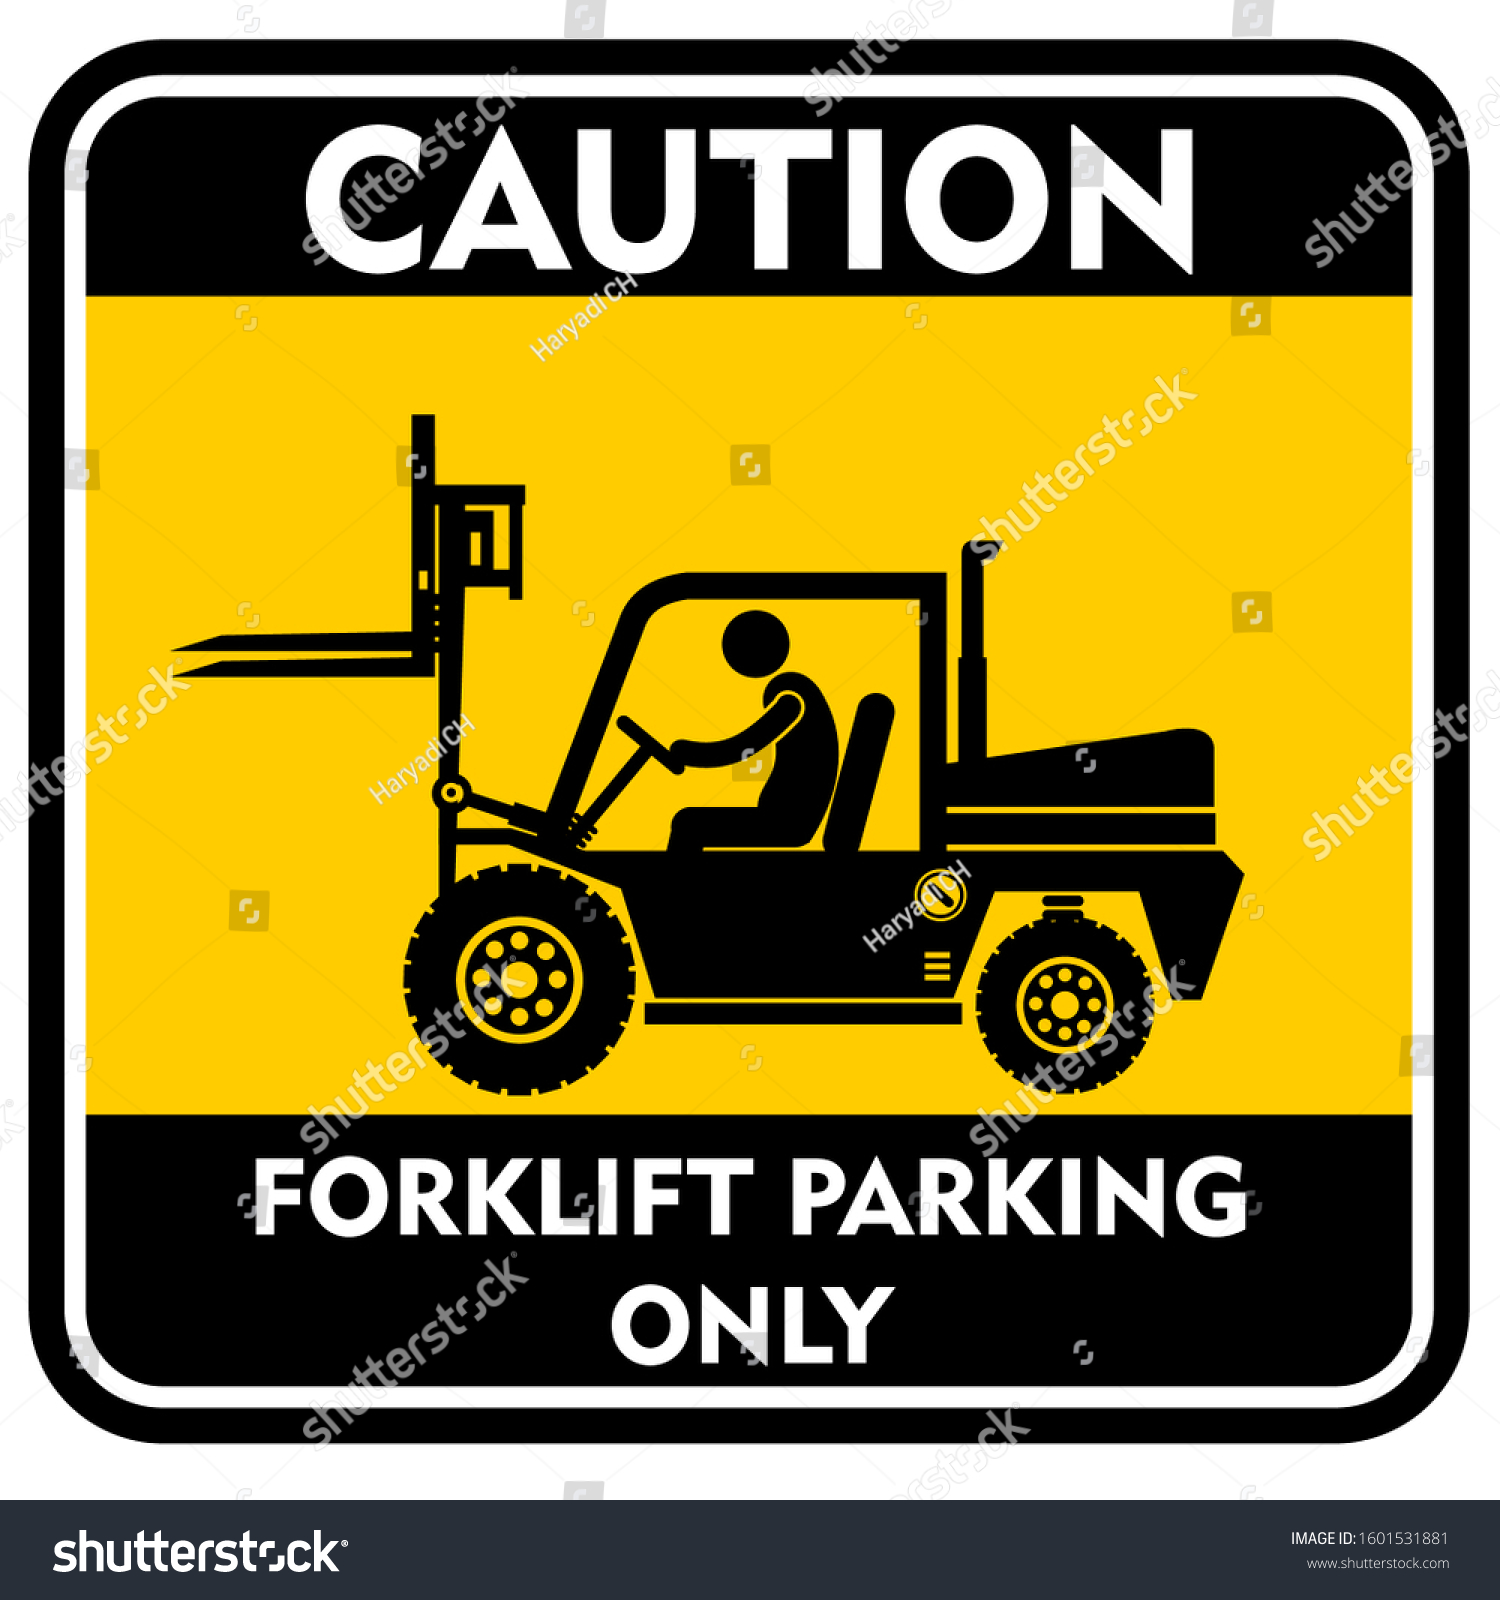 Caution Forklift Parking Only Sign Stock Vector Royalty Free 1601531881